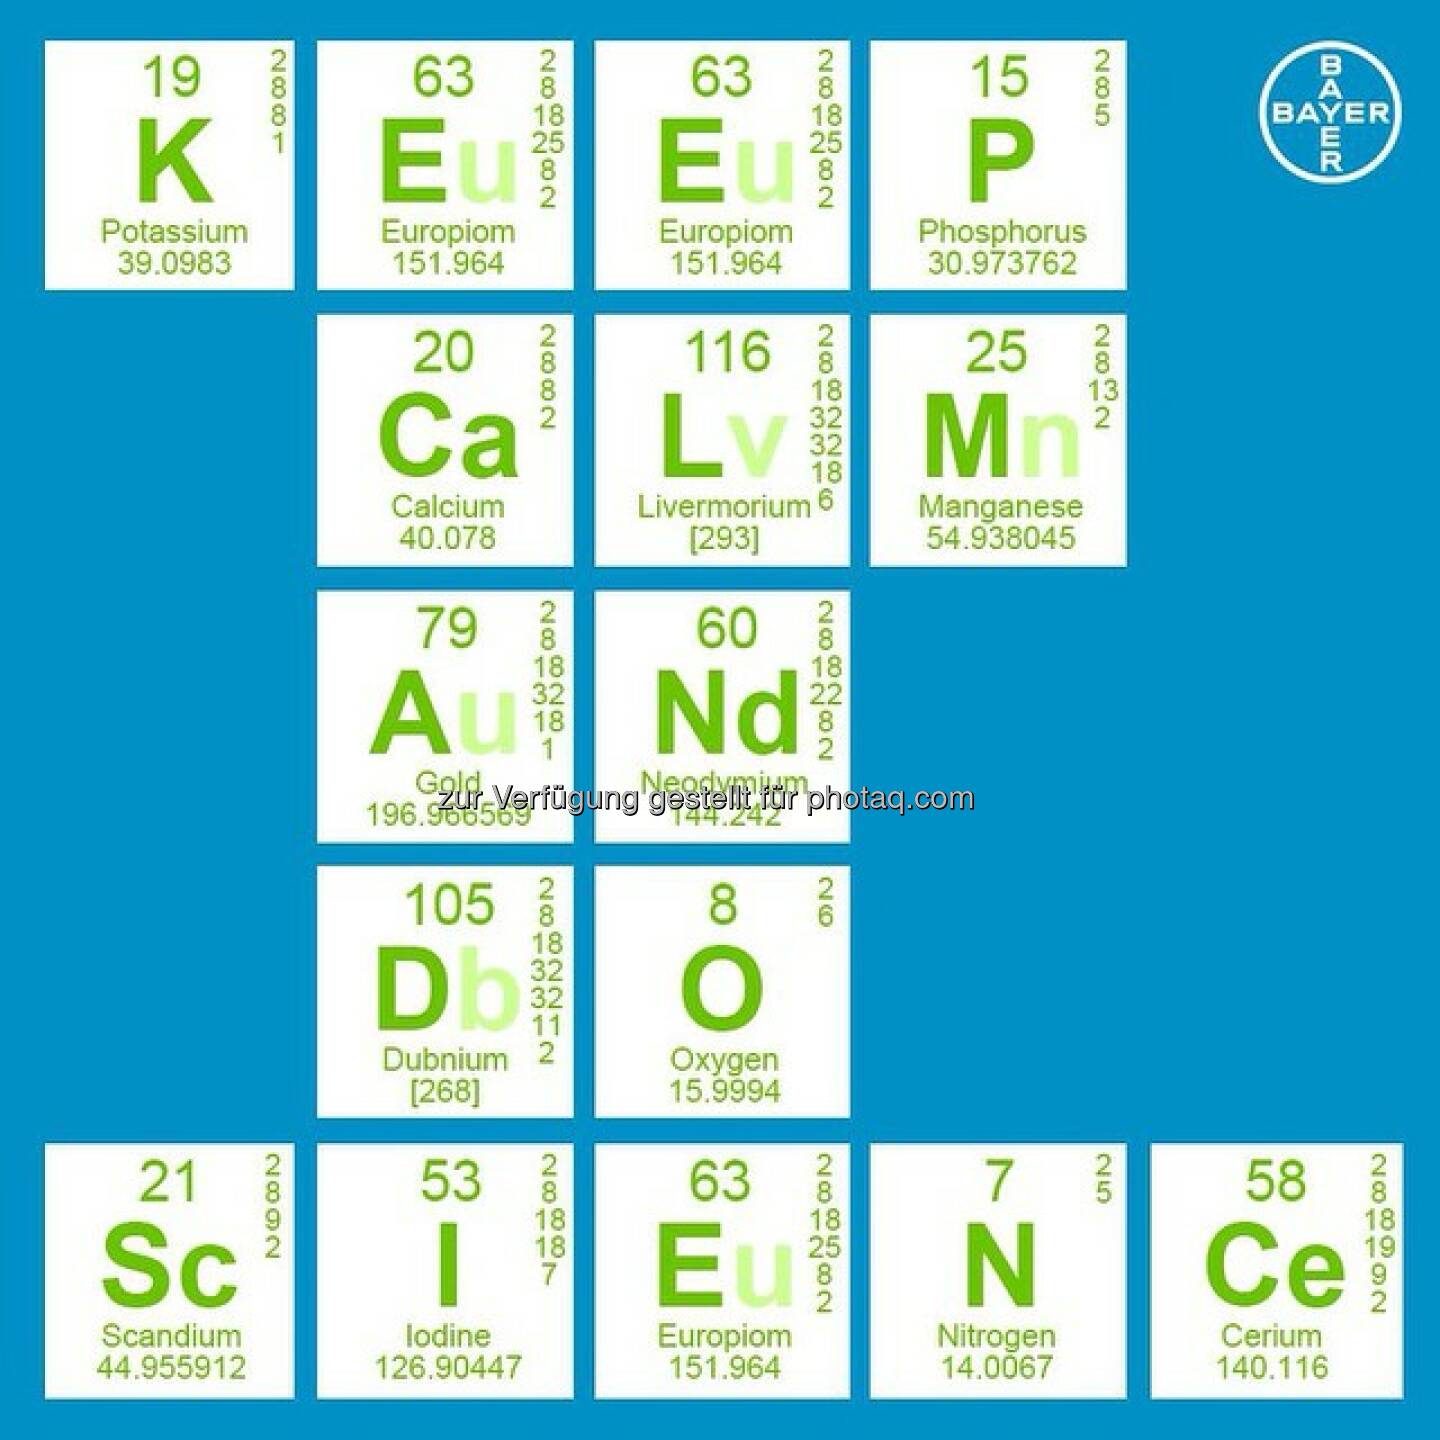 Bayer: Keep #calm and do #Science  Source: http://facebook.com/Bayer